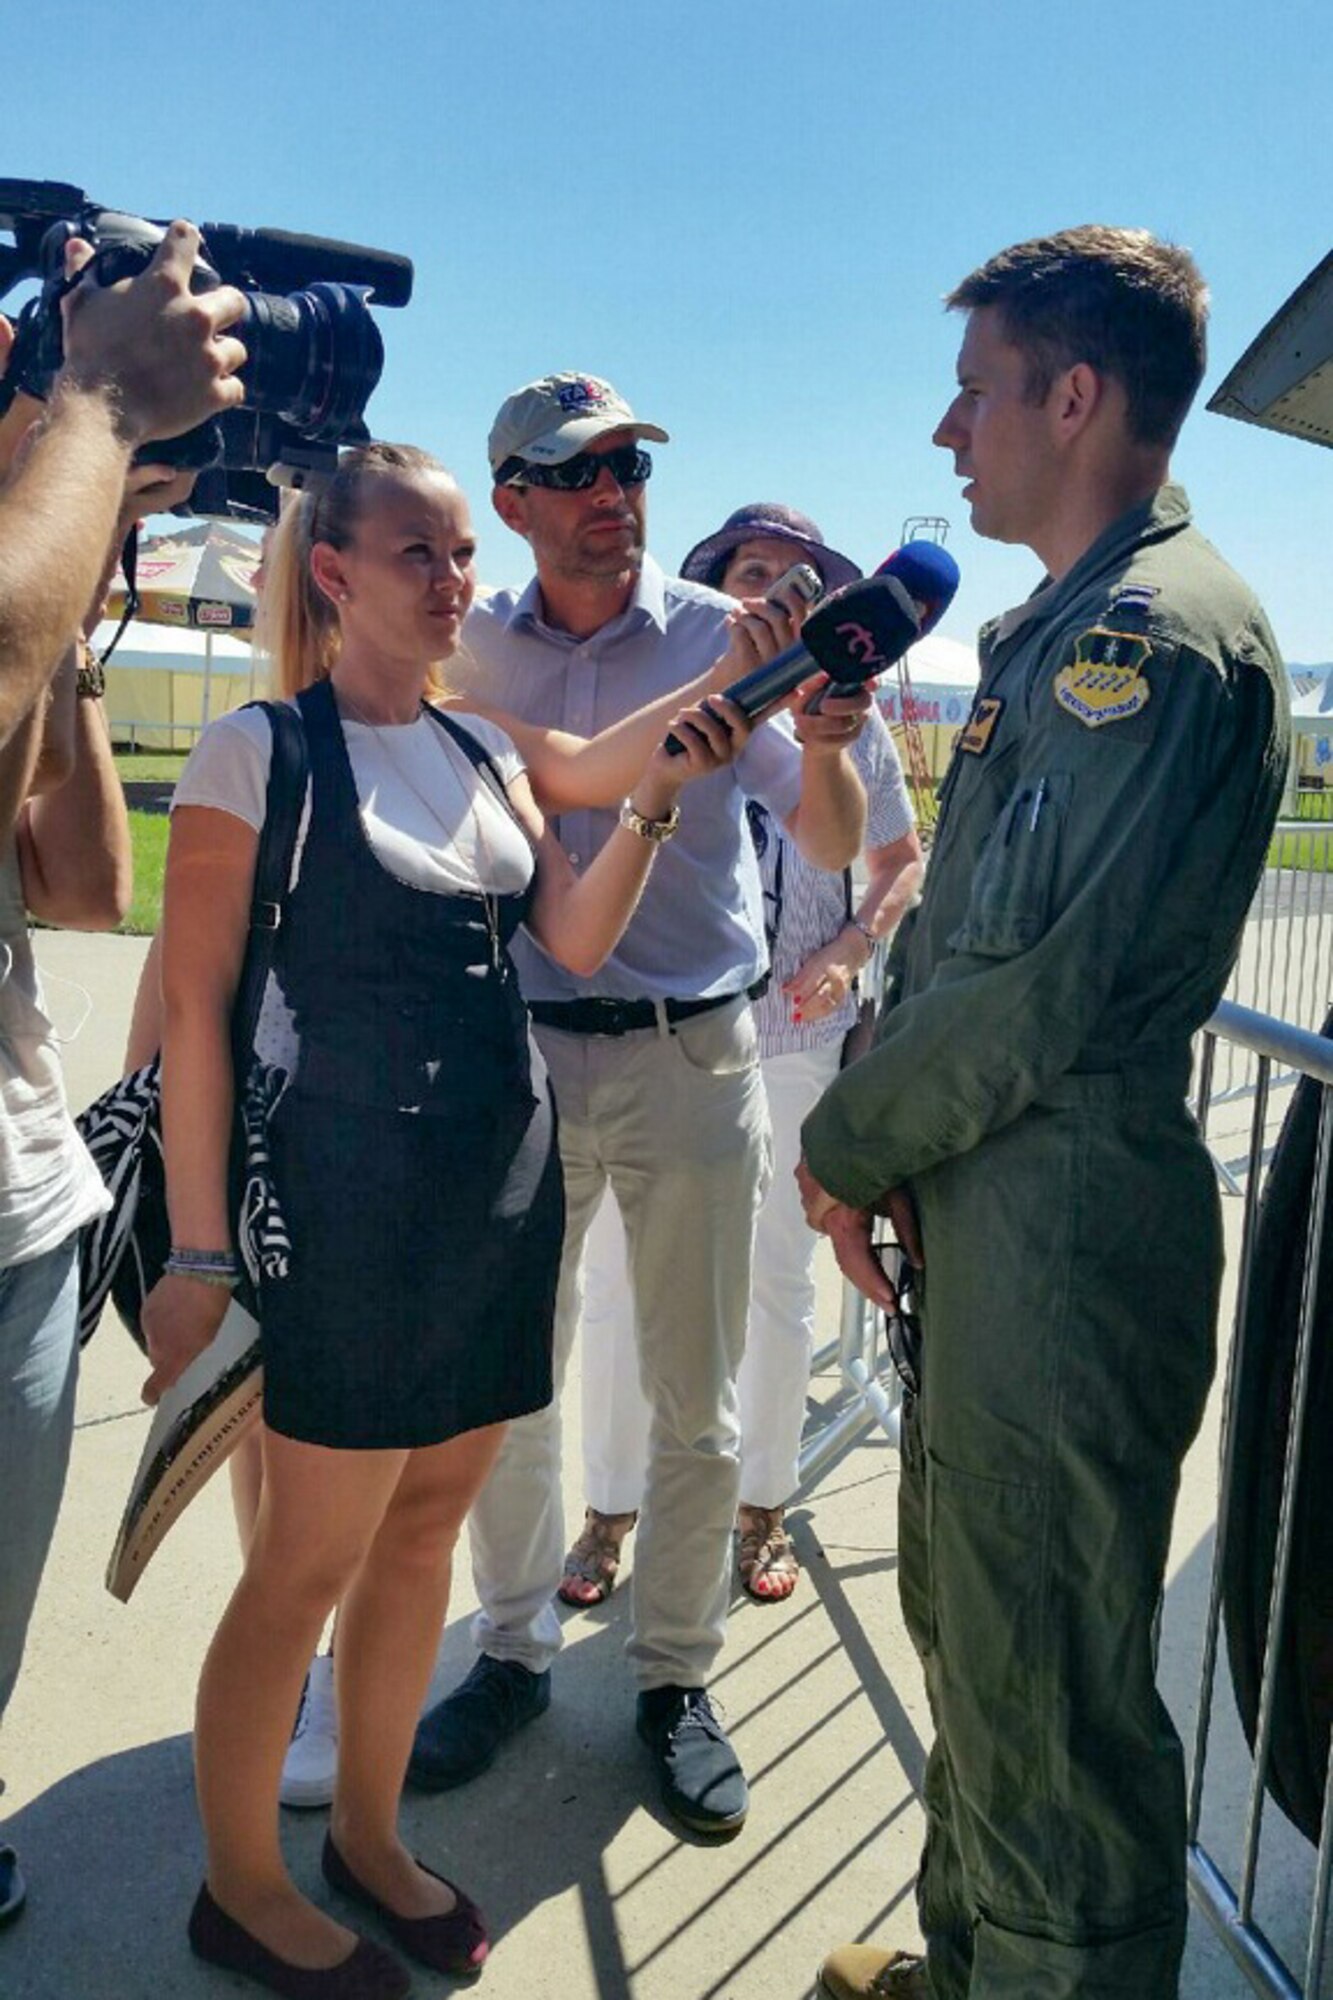 A U.S. Air Force Capt. Mark Budgeon, aircrew member from the 11th Bomb Squadron, interviews with local media during a special tour of a B-52H Stratofortress on Aug. 26,2016, Sliac, Slovakia. The B-52 is assigned to the Reserve 307th Bomb Wing, Barksdale Air Force Base, La., and arrived in Sliač to support the Slovak International Air Fest. (U.S. Air Force photo by Master Sgt. Andrew Branning/Released)